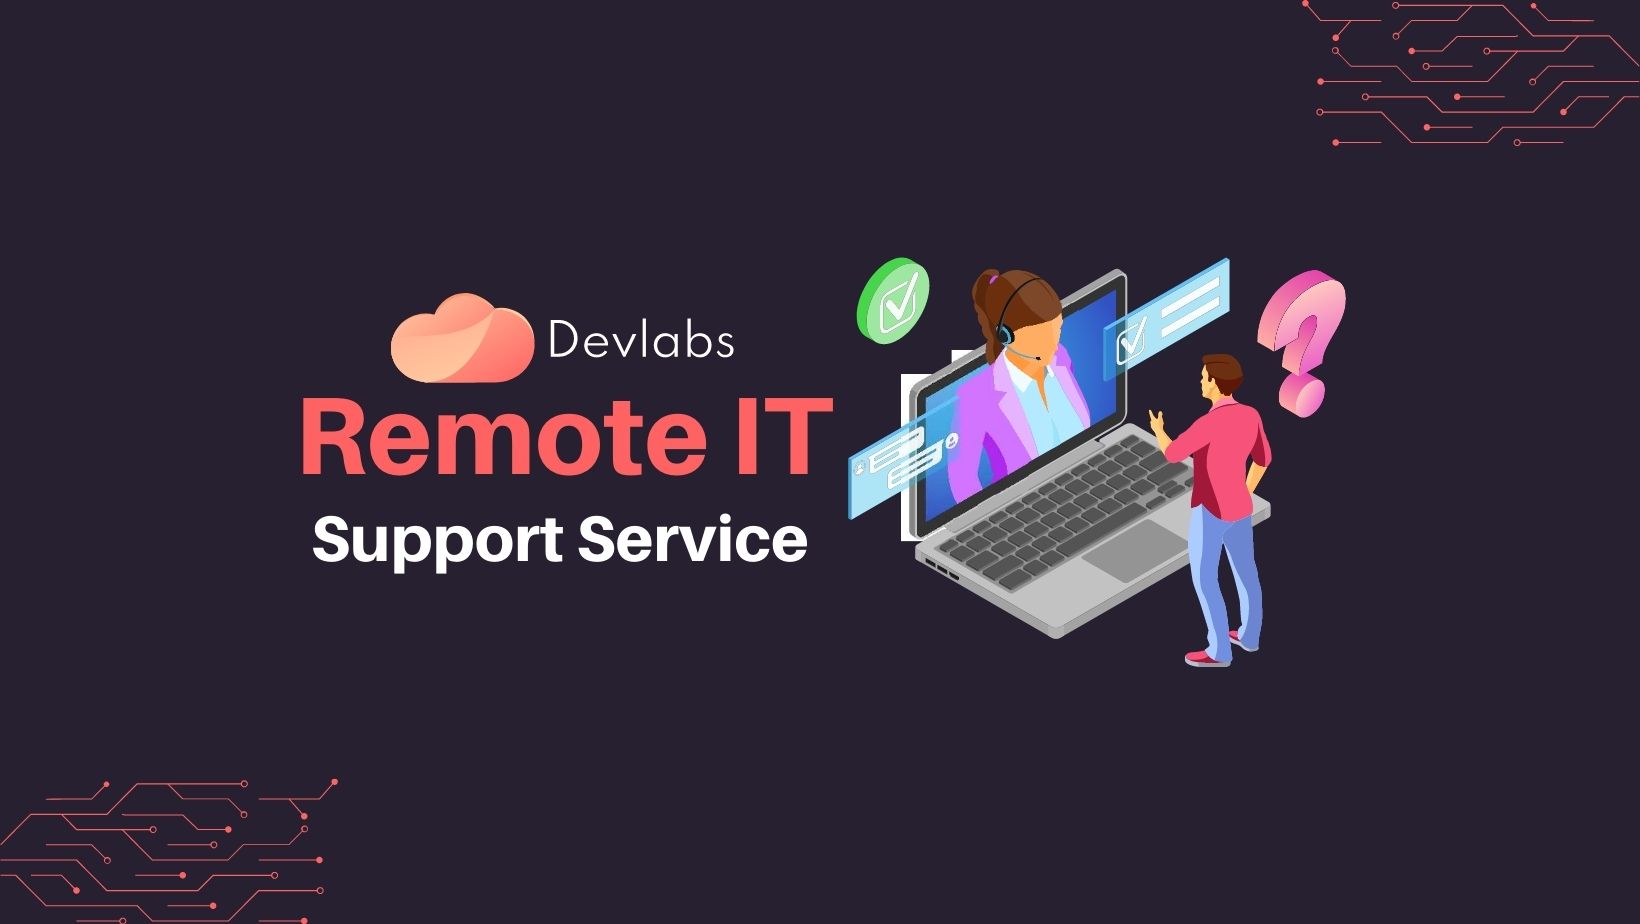 Remote IT Support Service - Devlabs Global